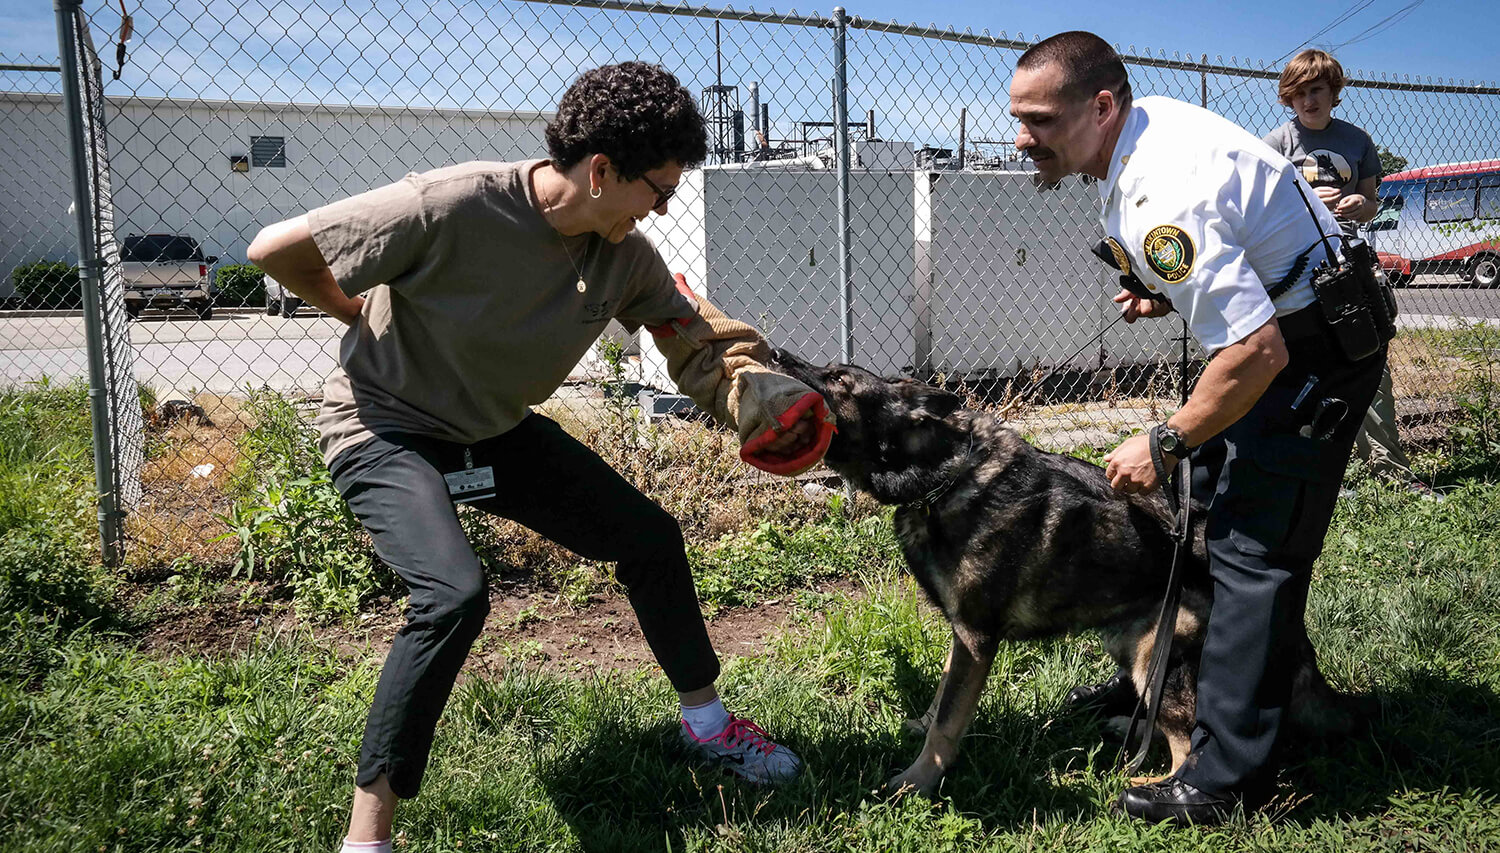 Otto offers an arm to a K9 for some bite work. (Image: Tracy Darling/Superfit Canine)